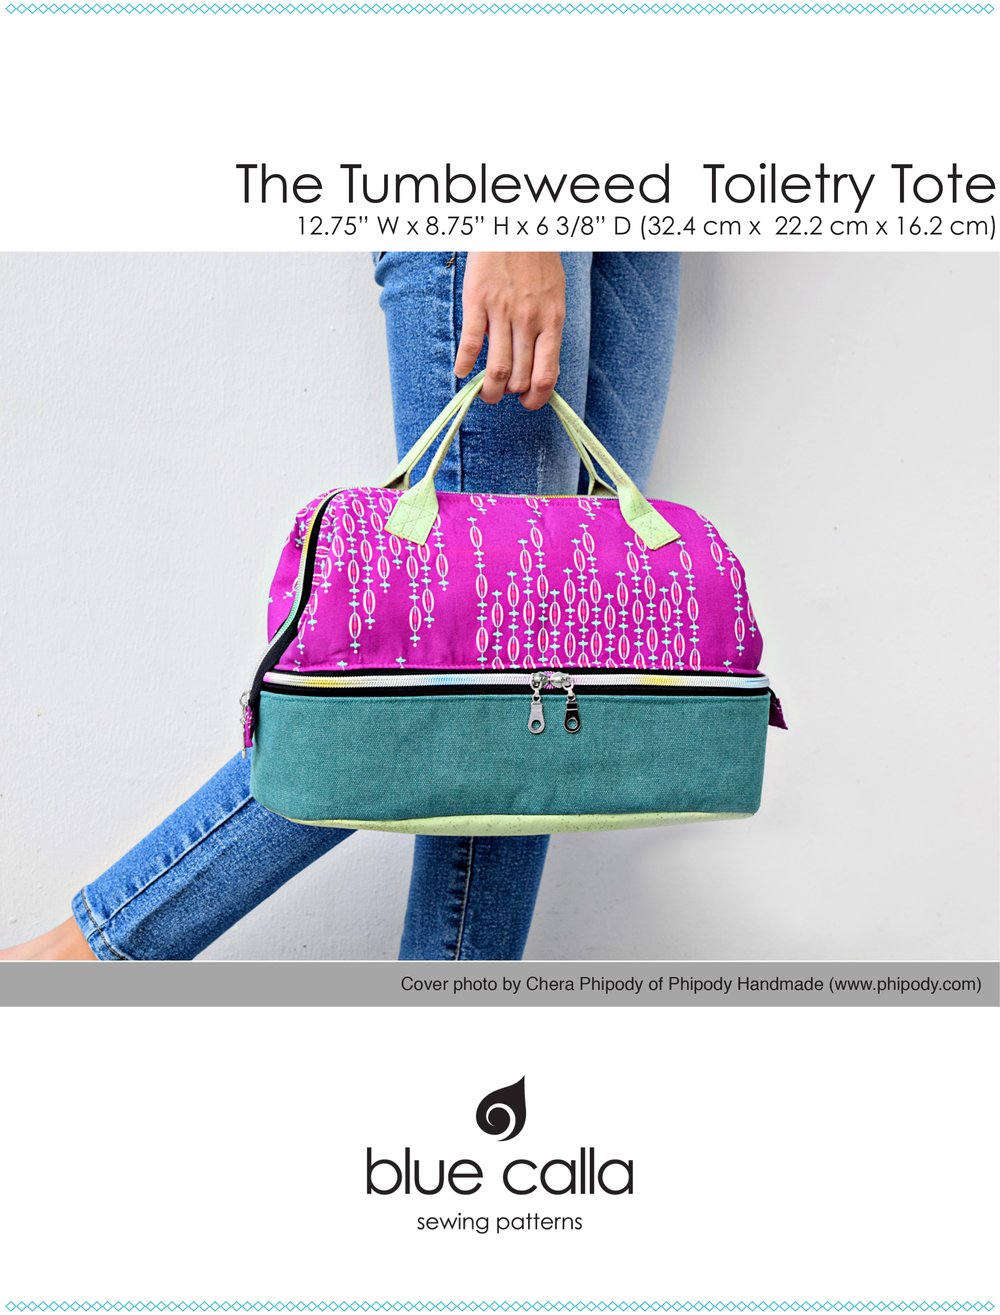 Tumbleweed Toiletry Tote by Blue Calla (March 2021 BOMC)